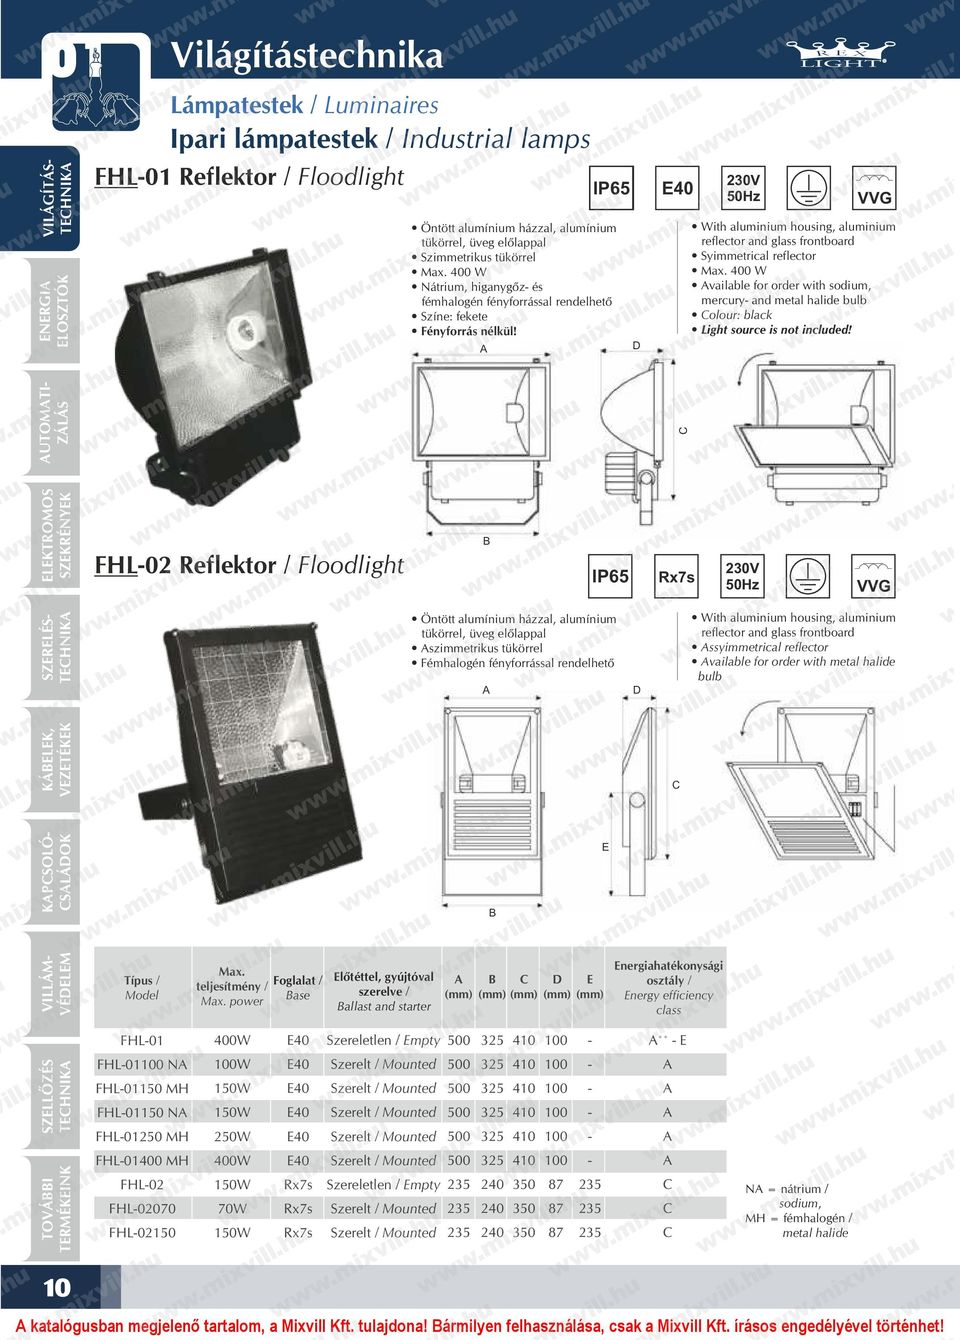 400 W vailable for order with sodium, mercury and metal halide bulb Colour: black Light source is not included!